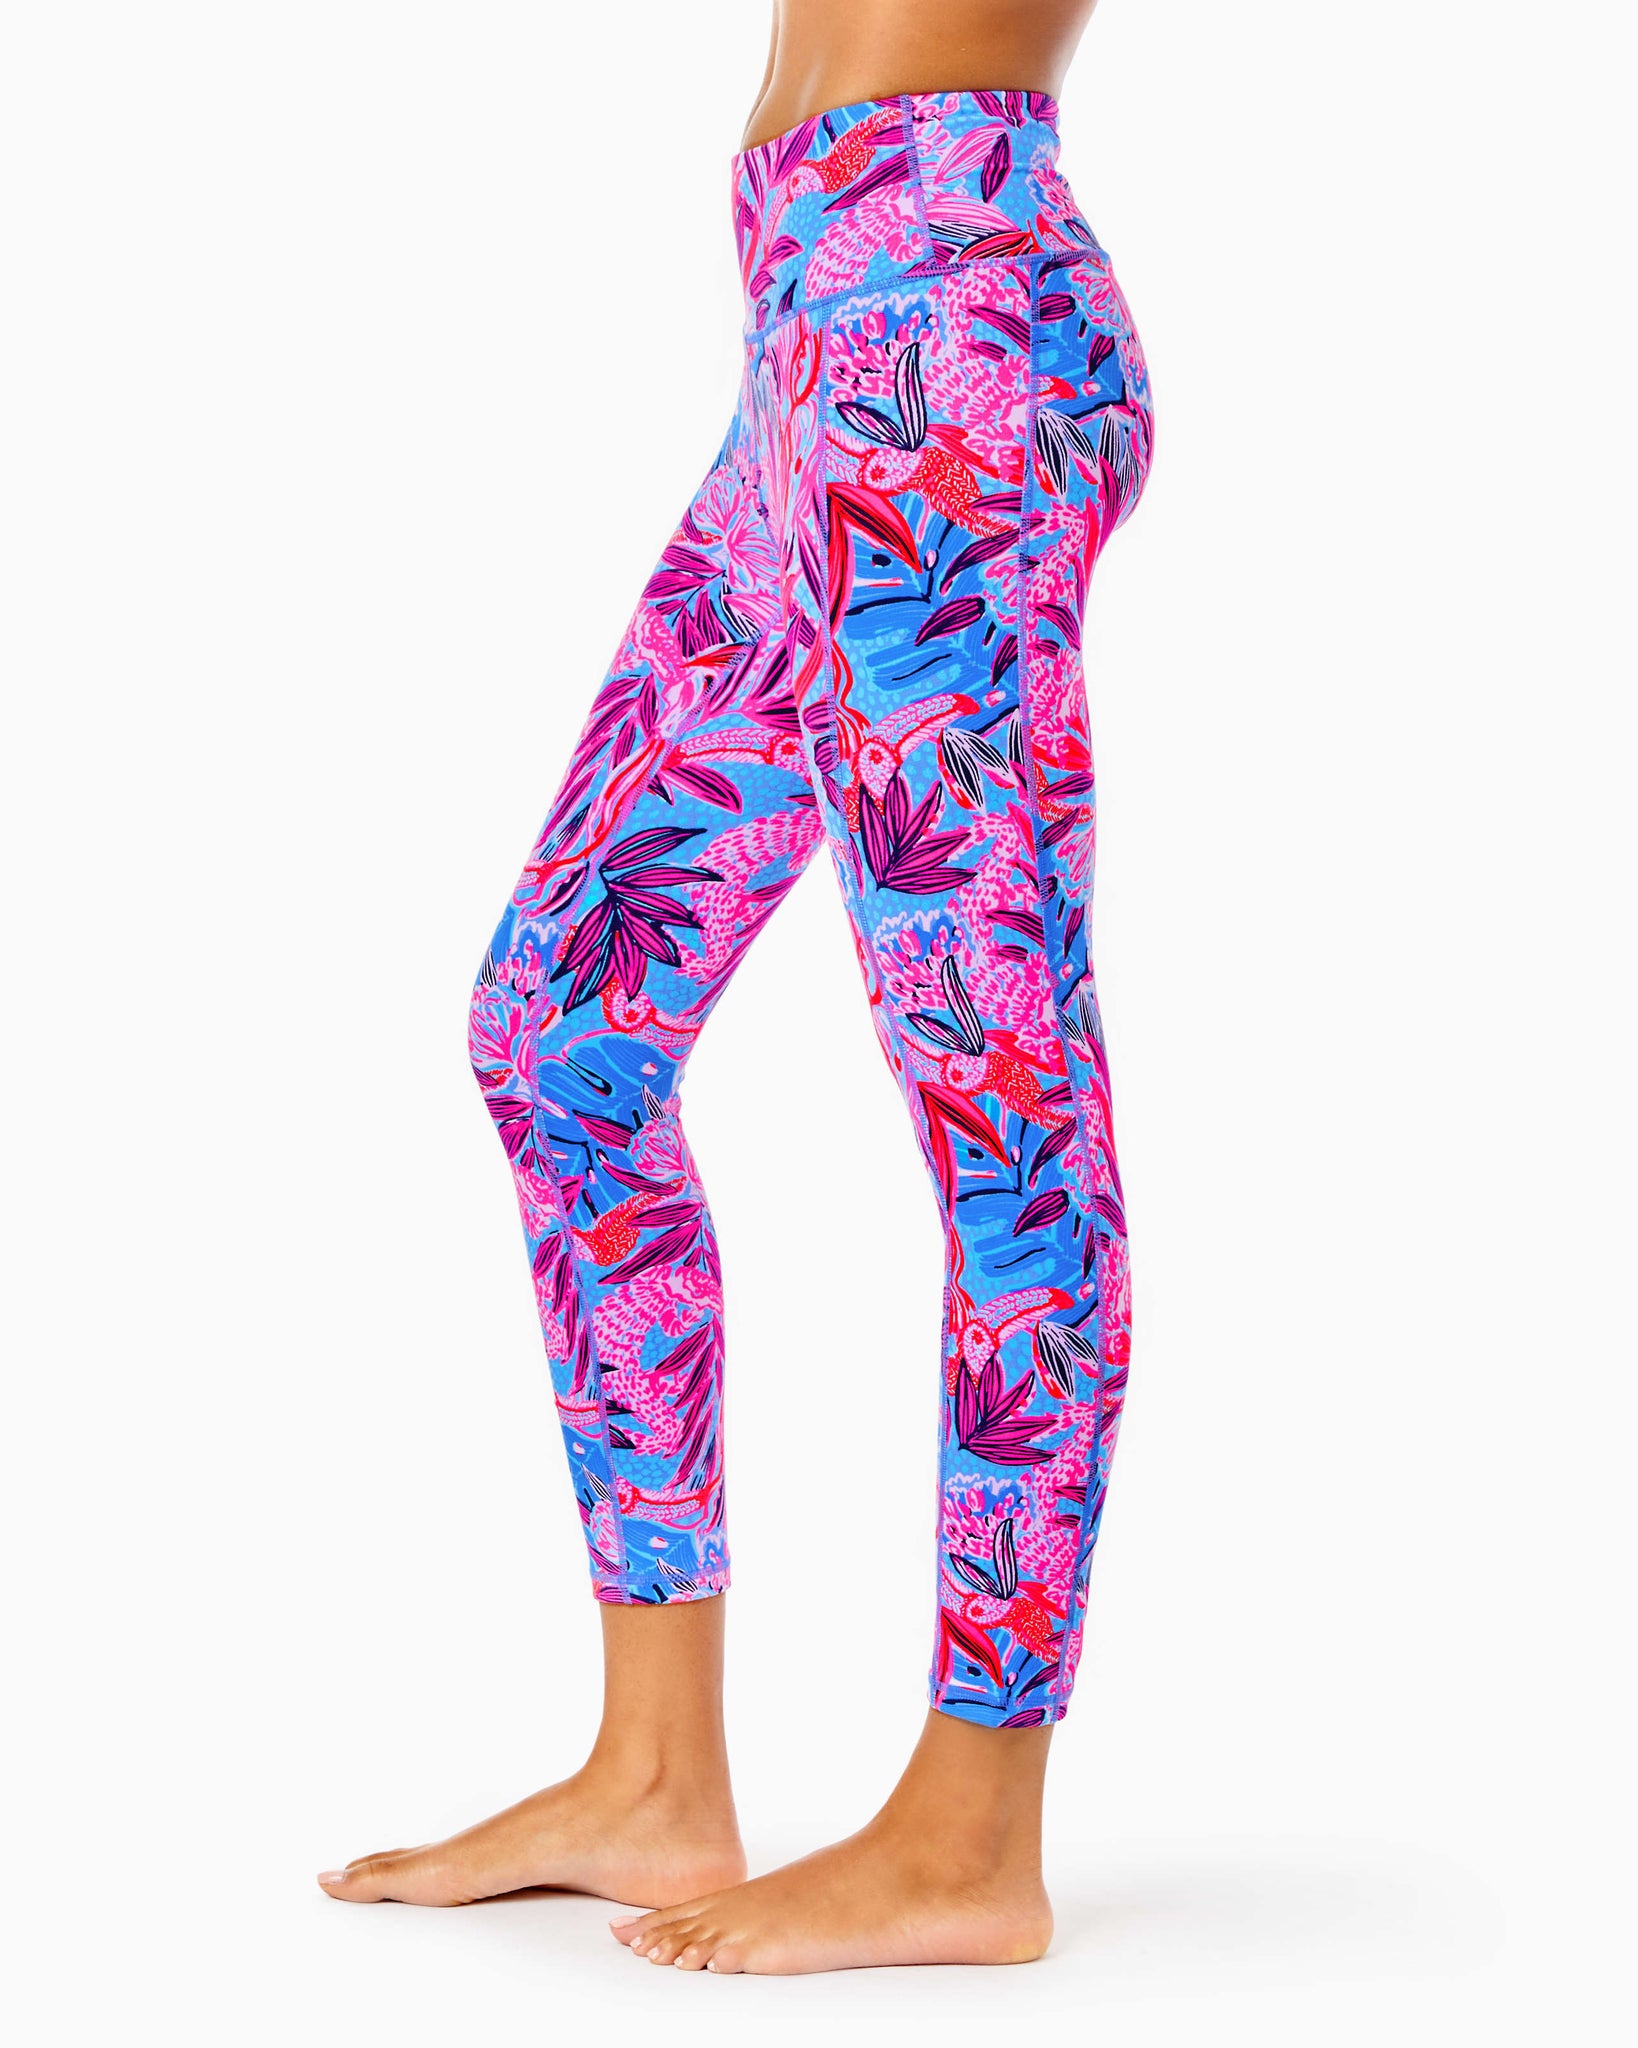 Lilly Pulitzer Weekender Leggings  Clothes design, Leggings shop, Lilly  pulitzer